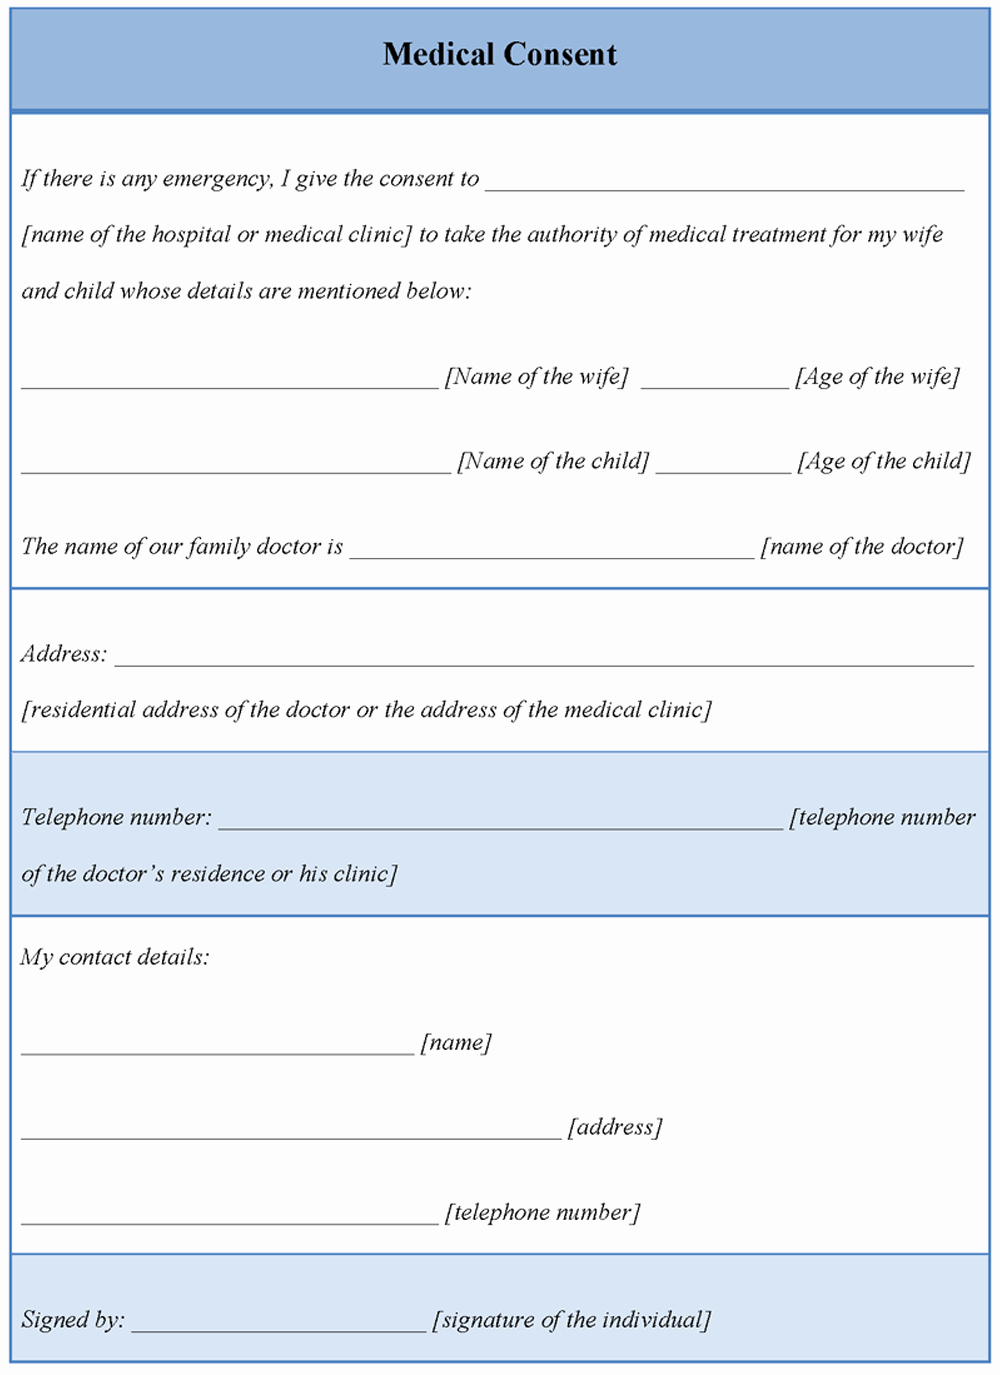 Medical Consent Letter Template - Medical Clearance Letter Template Beautiful Best Medical Certificate